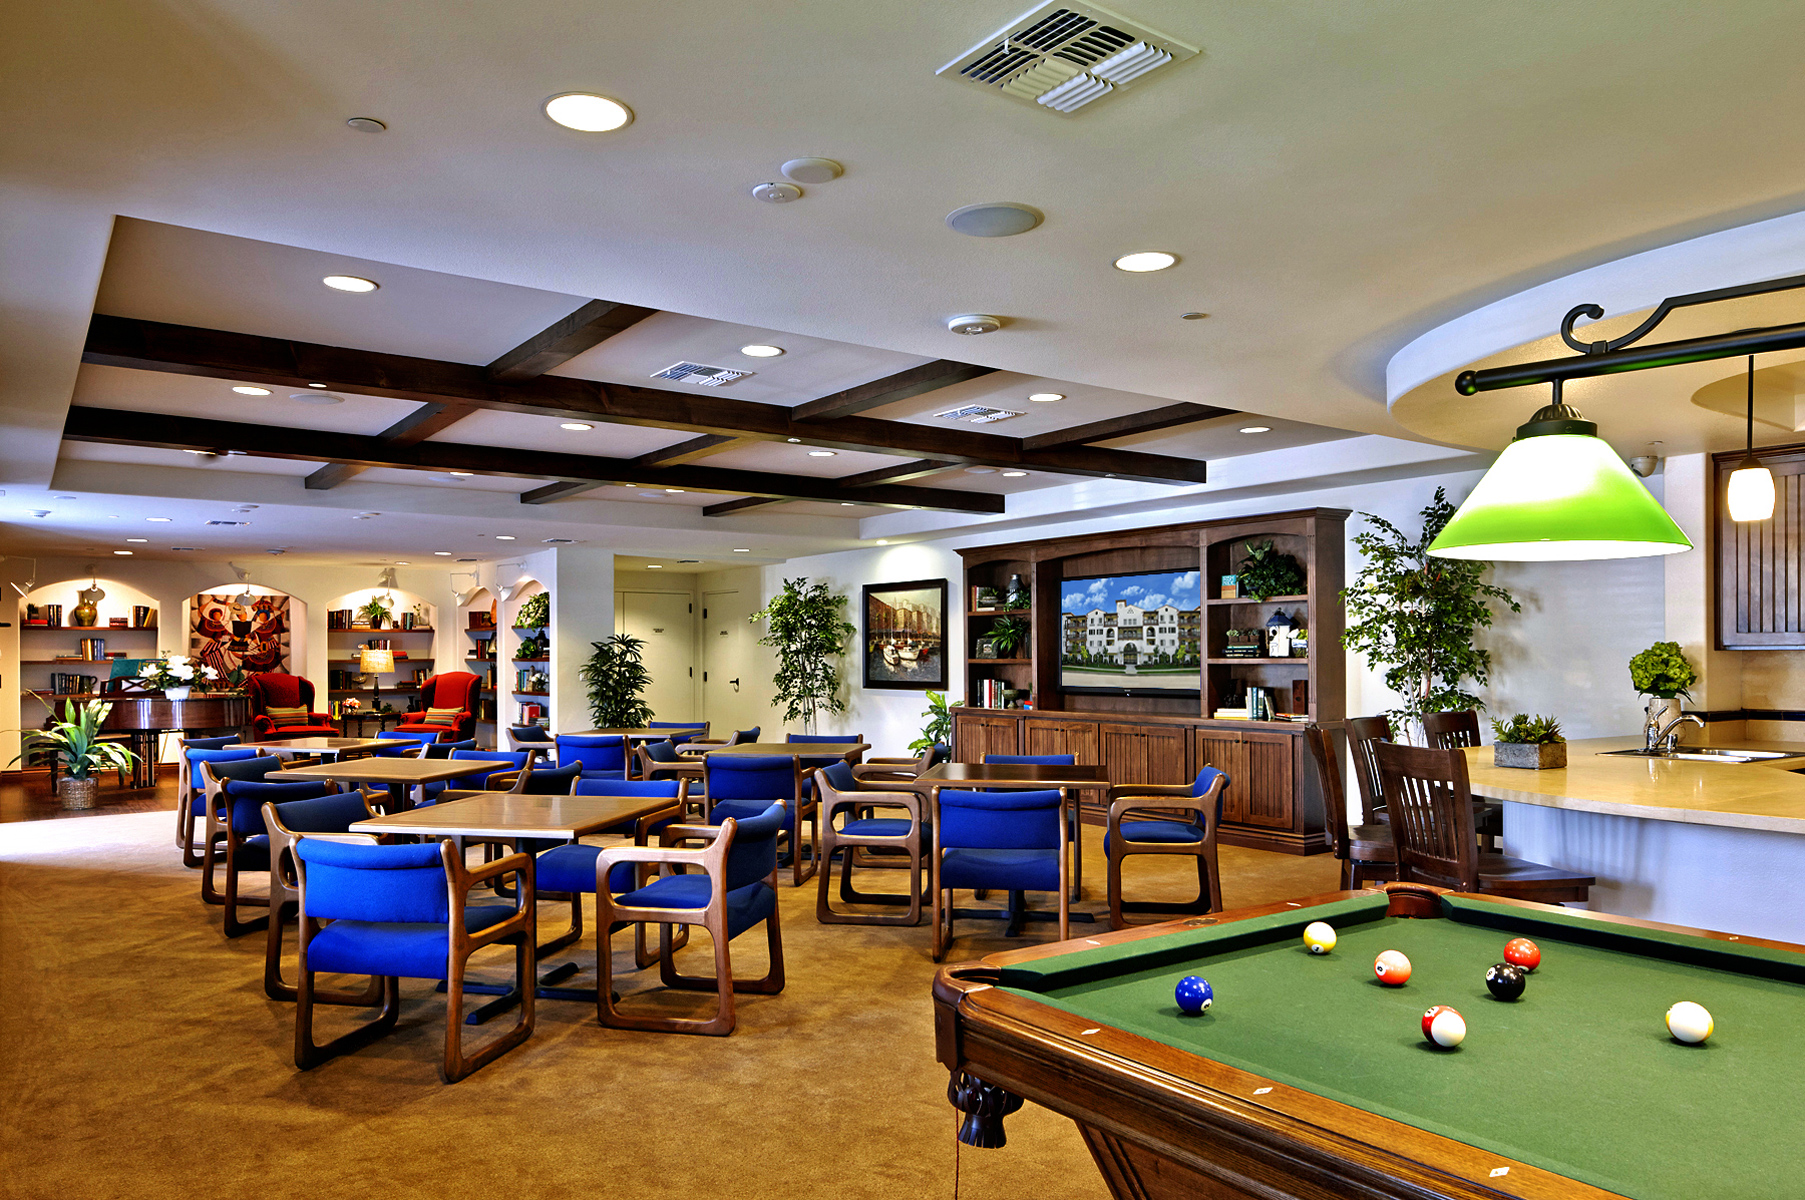 Image of community floor equipped with pool table, furniture, bar and piano